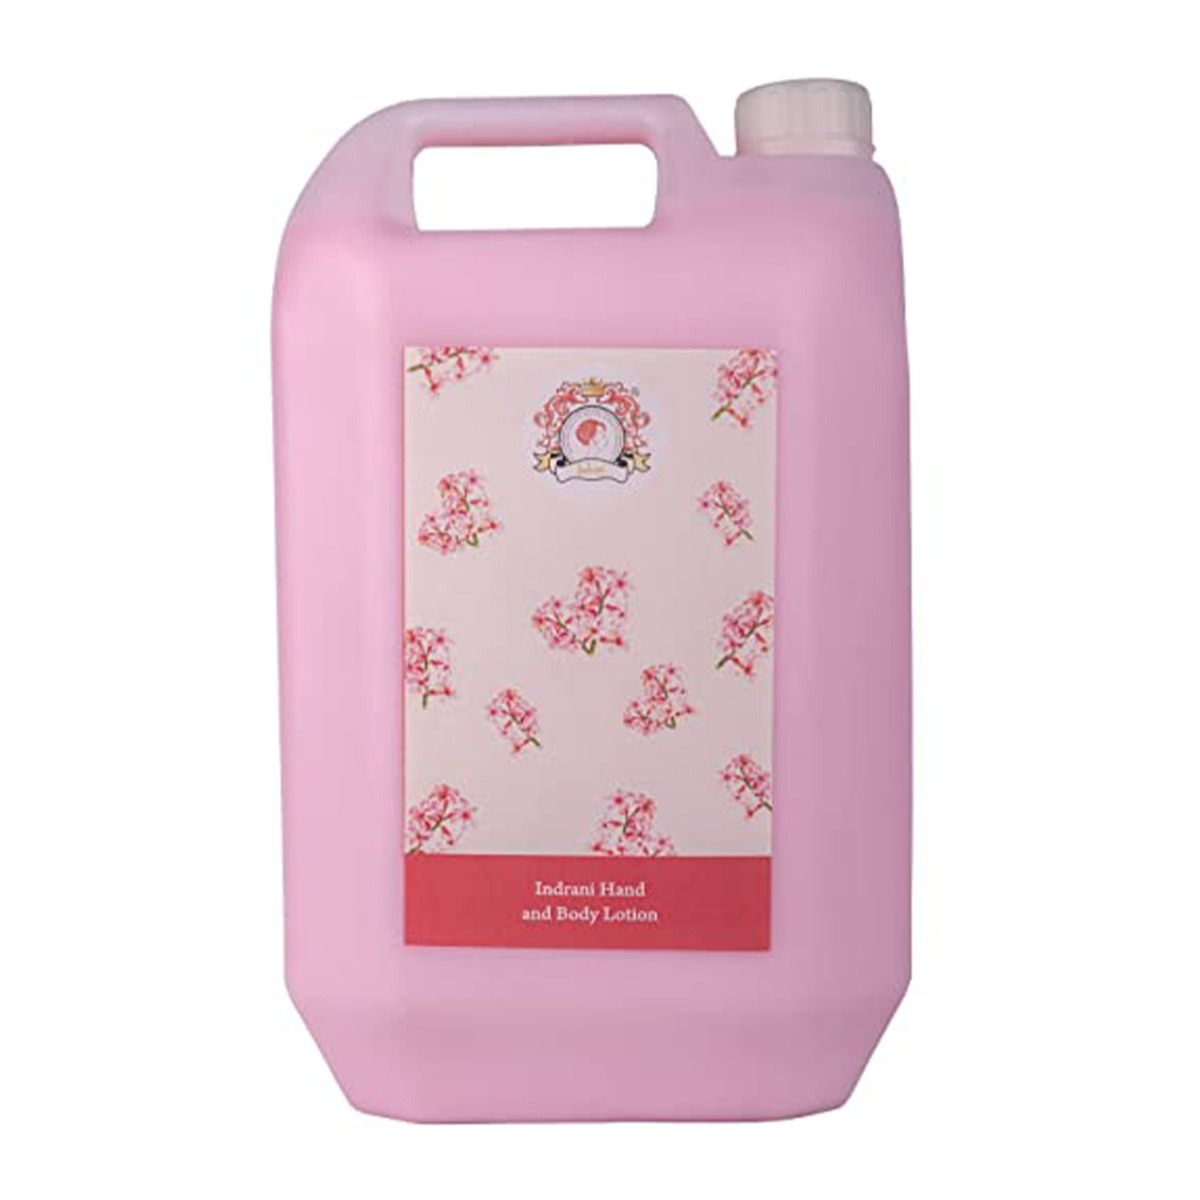 Indrani Hand And Body Lotion, 5ltr